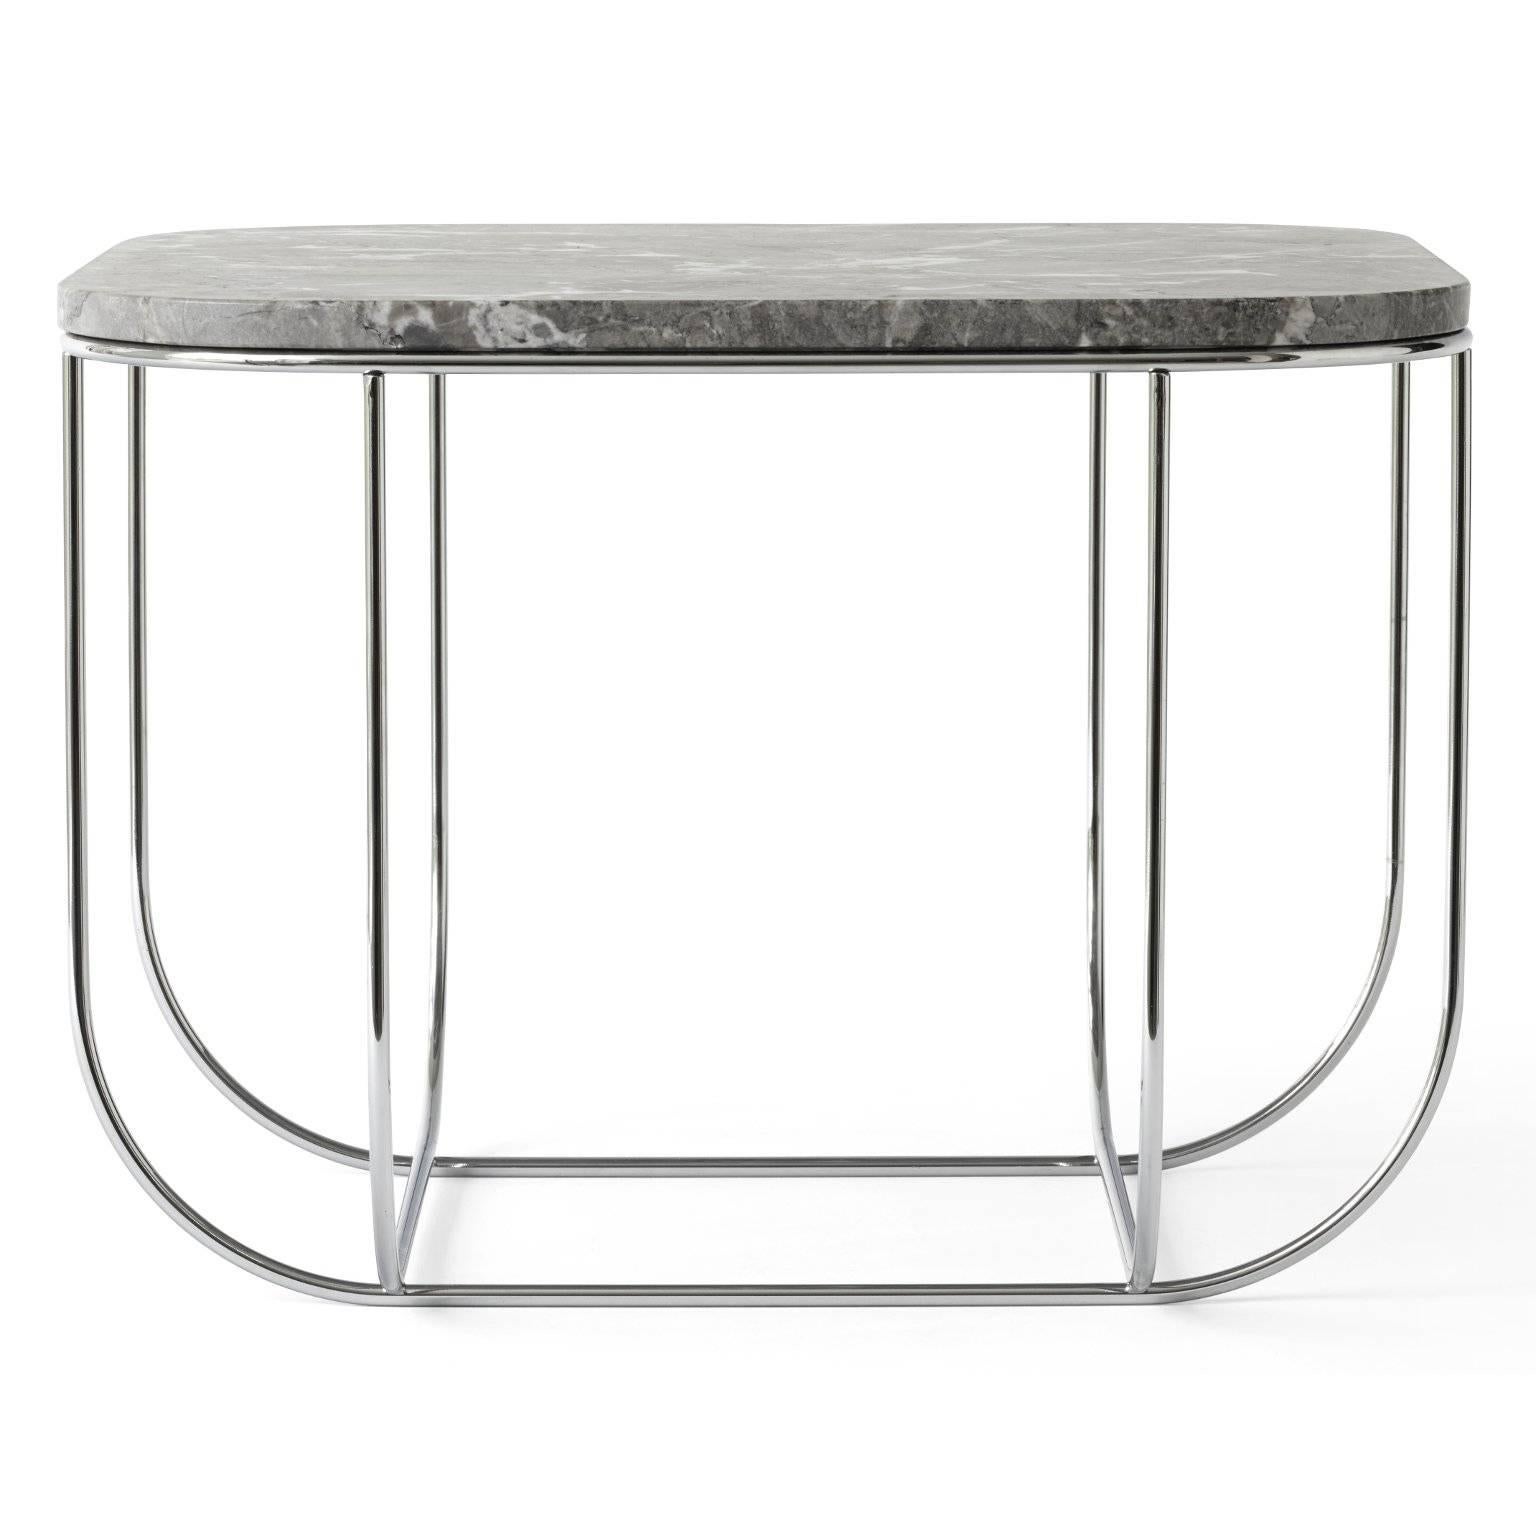 New ways of living demand new design solutions. That’s the philosophy behind the cage series, which combines strong functional storage ambition with an elegant aesthetic. Cage table is a beautiful marble top side table with slender steel legs that